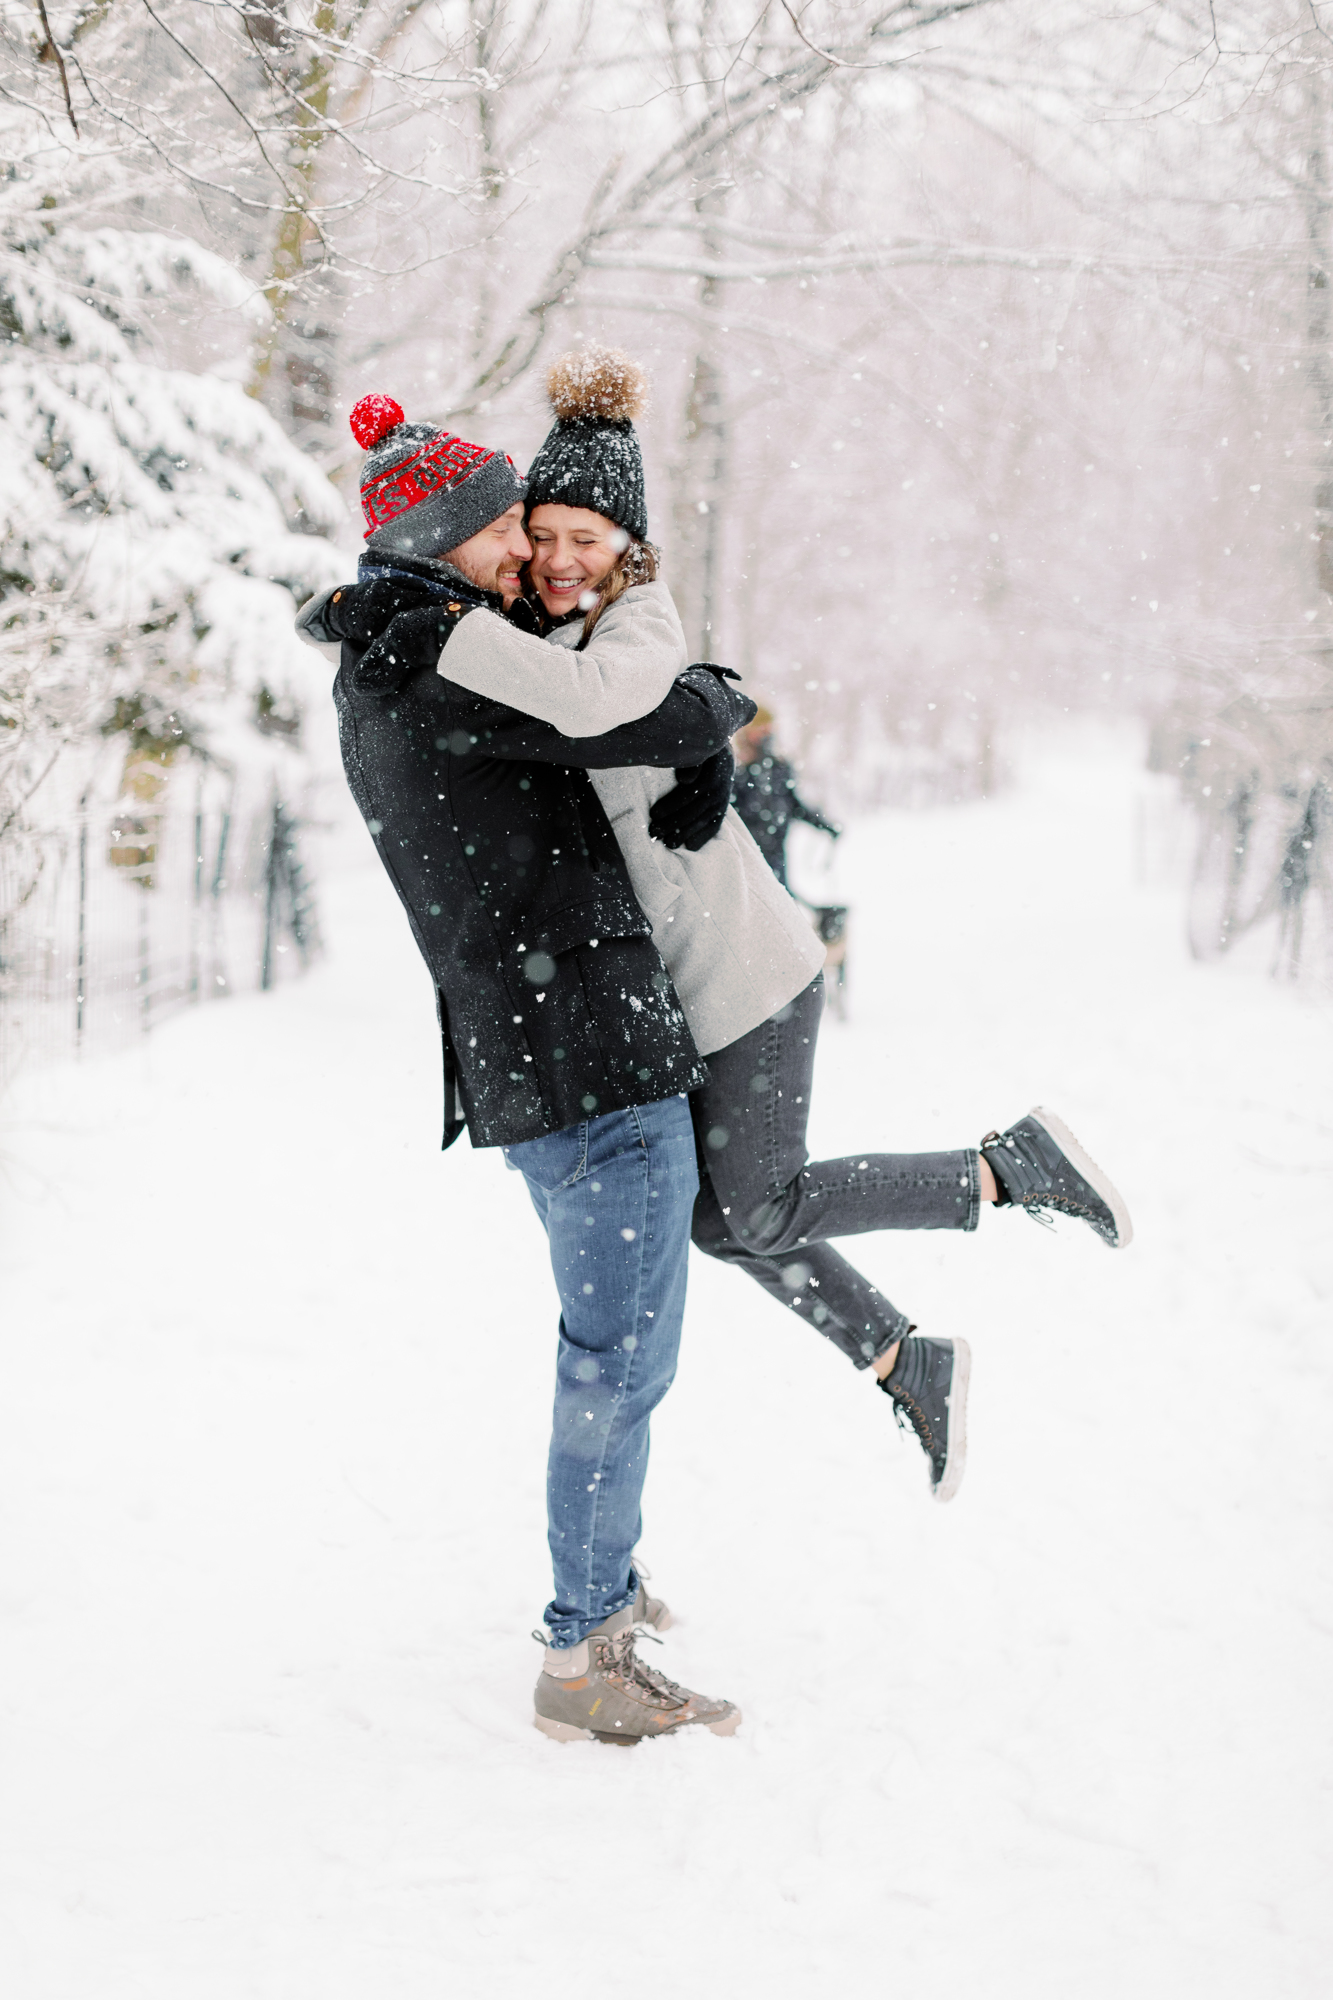 Dazzling and Snowy Engagement Photos in Prospect Park